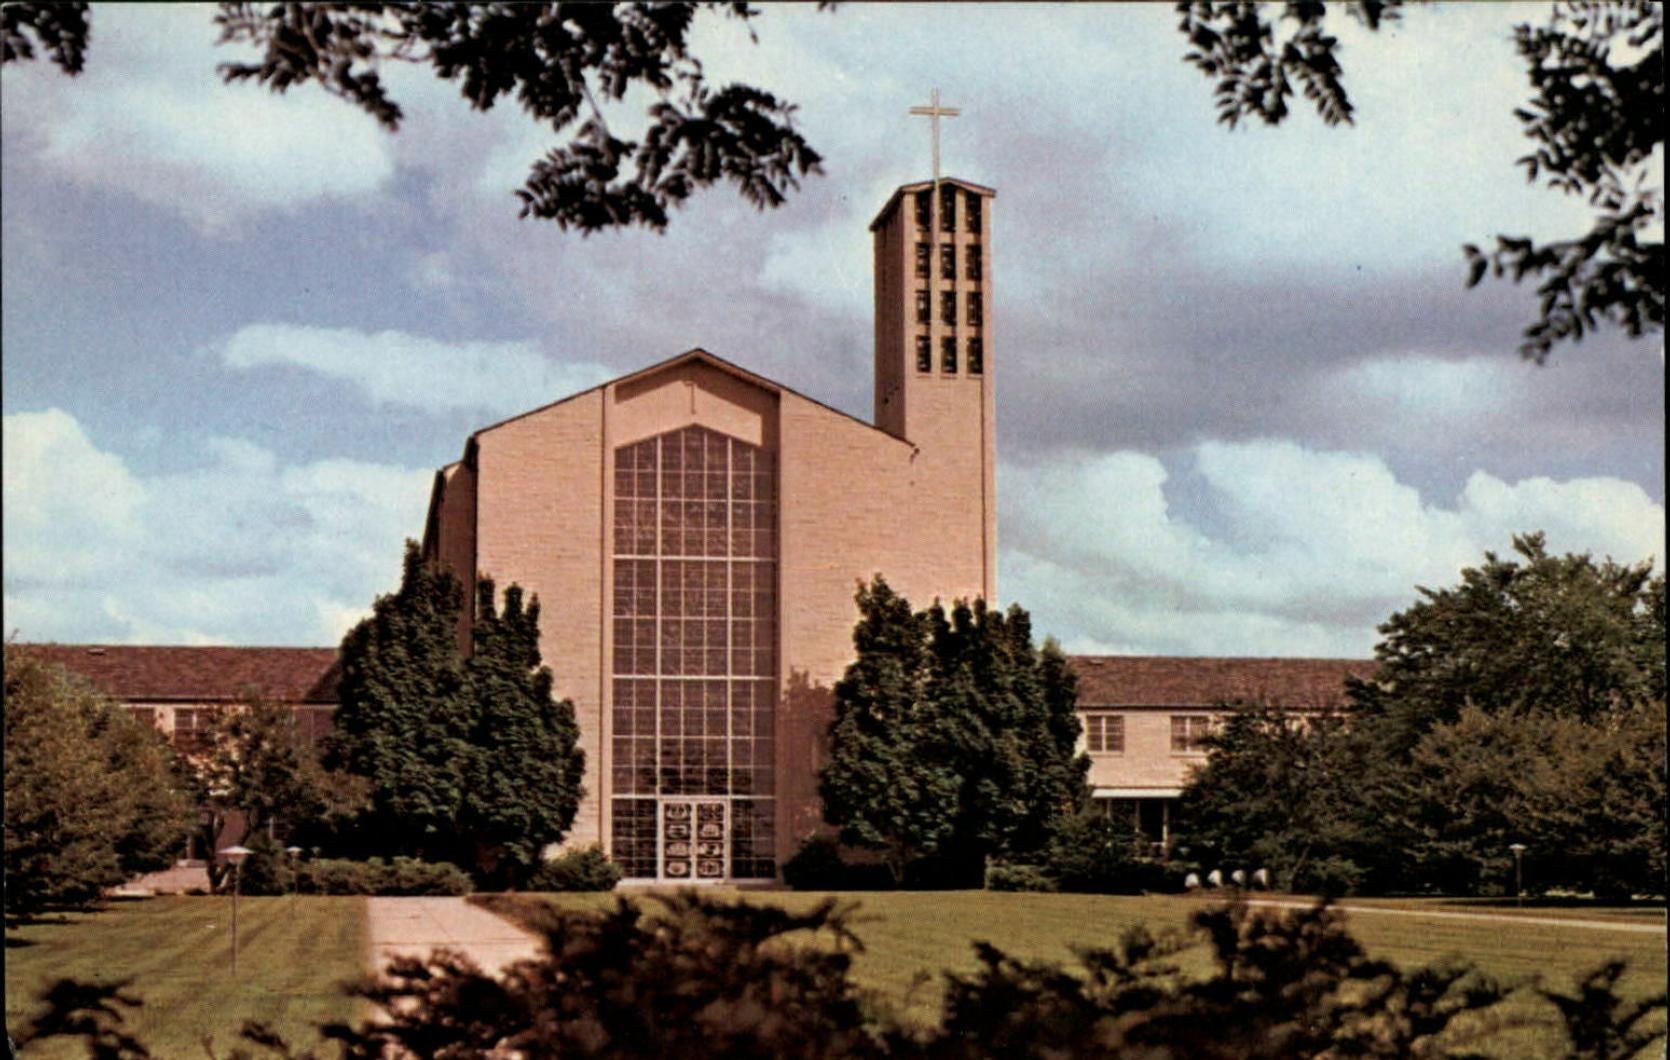 St. Norbert Abbey, church • UNKNOWN YEAR